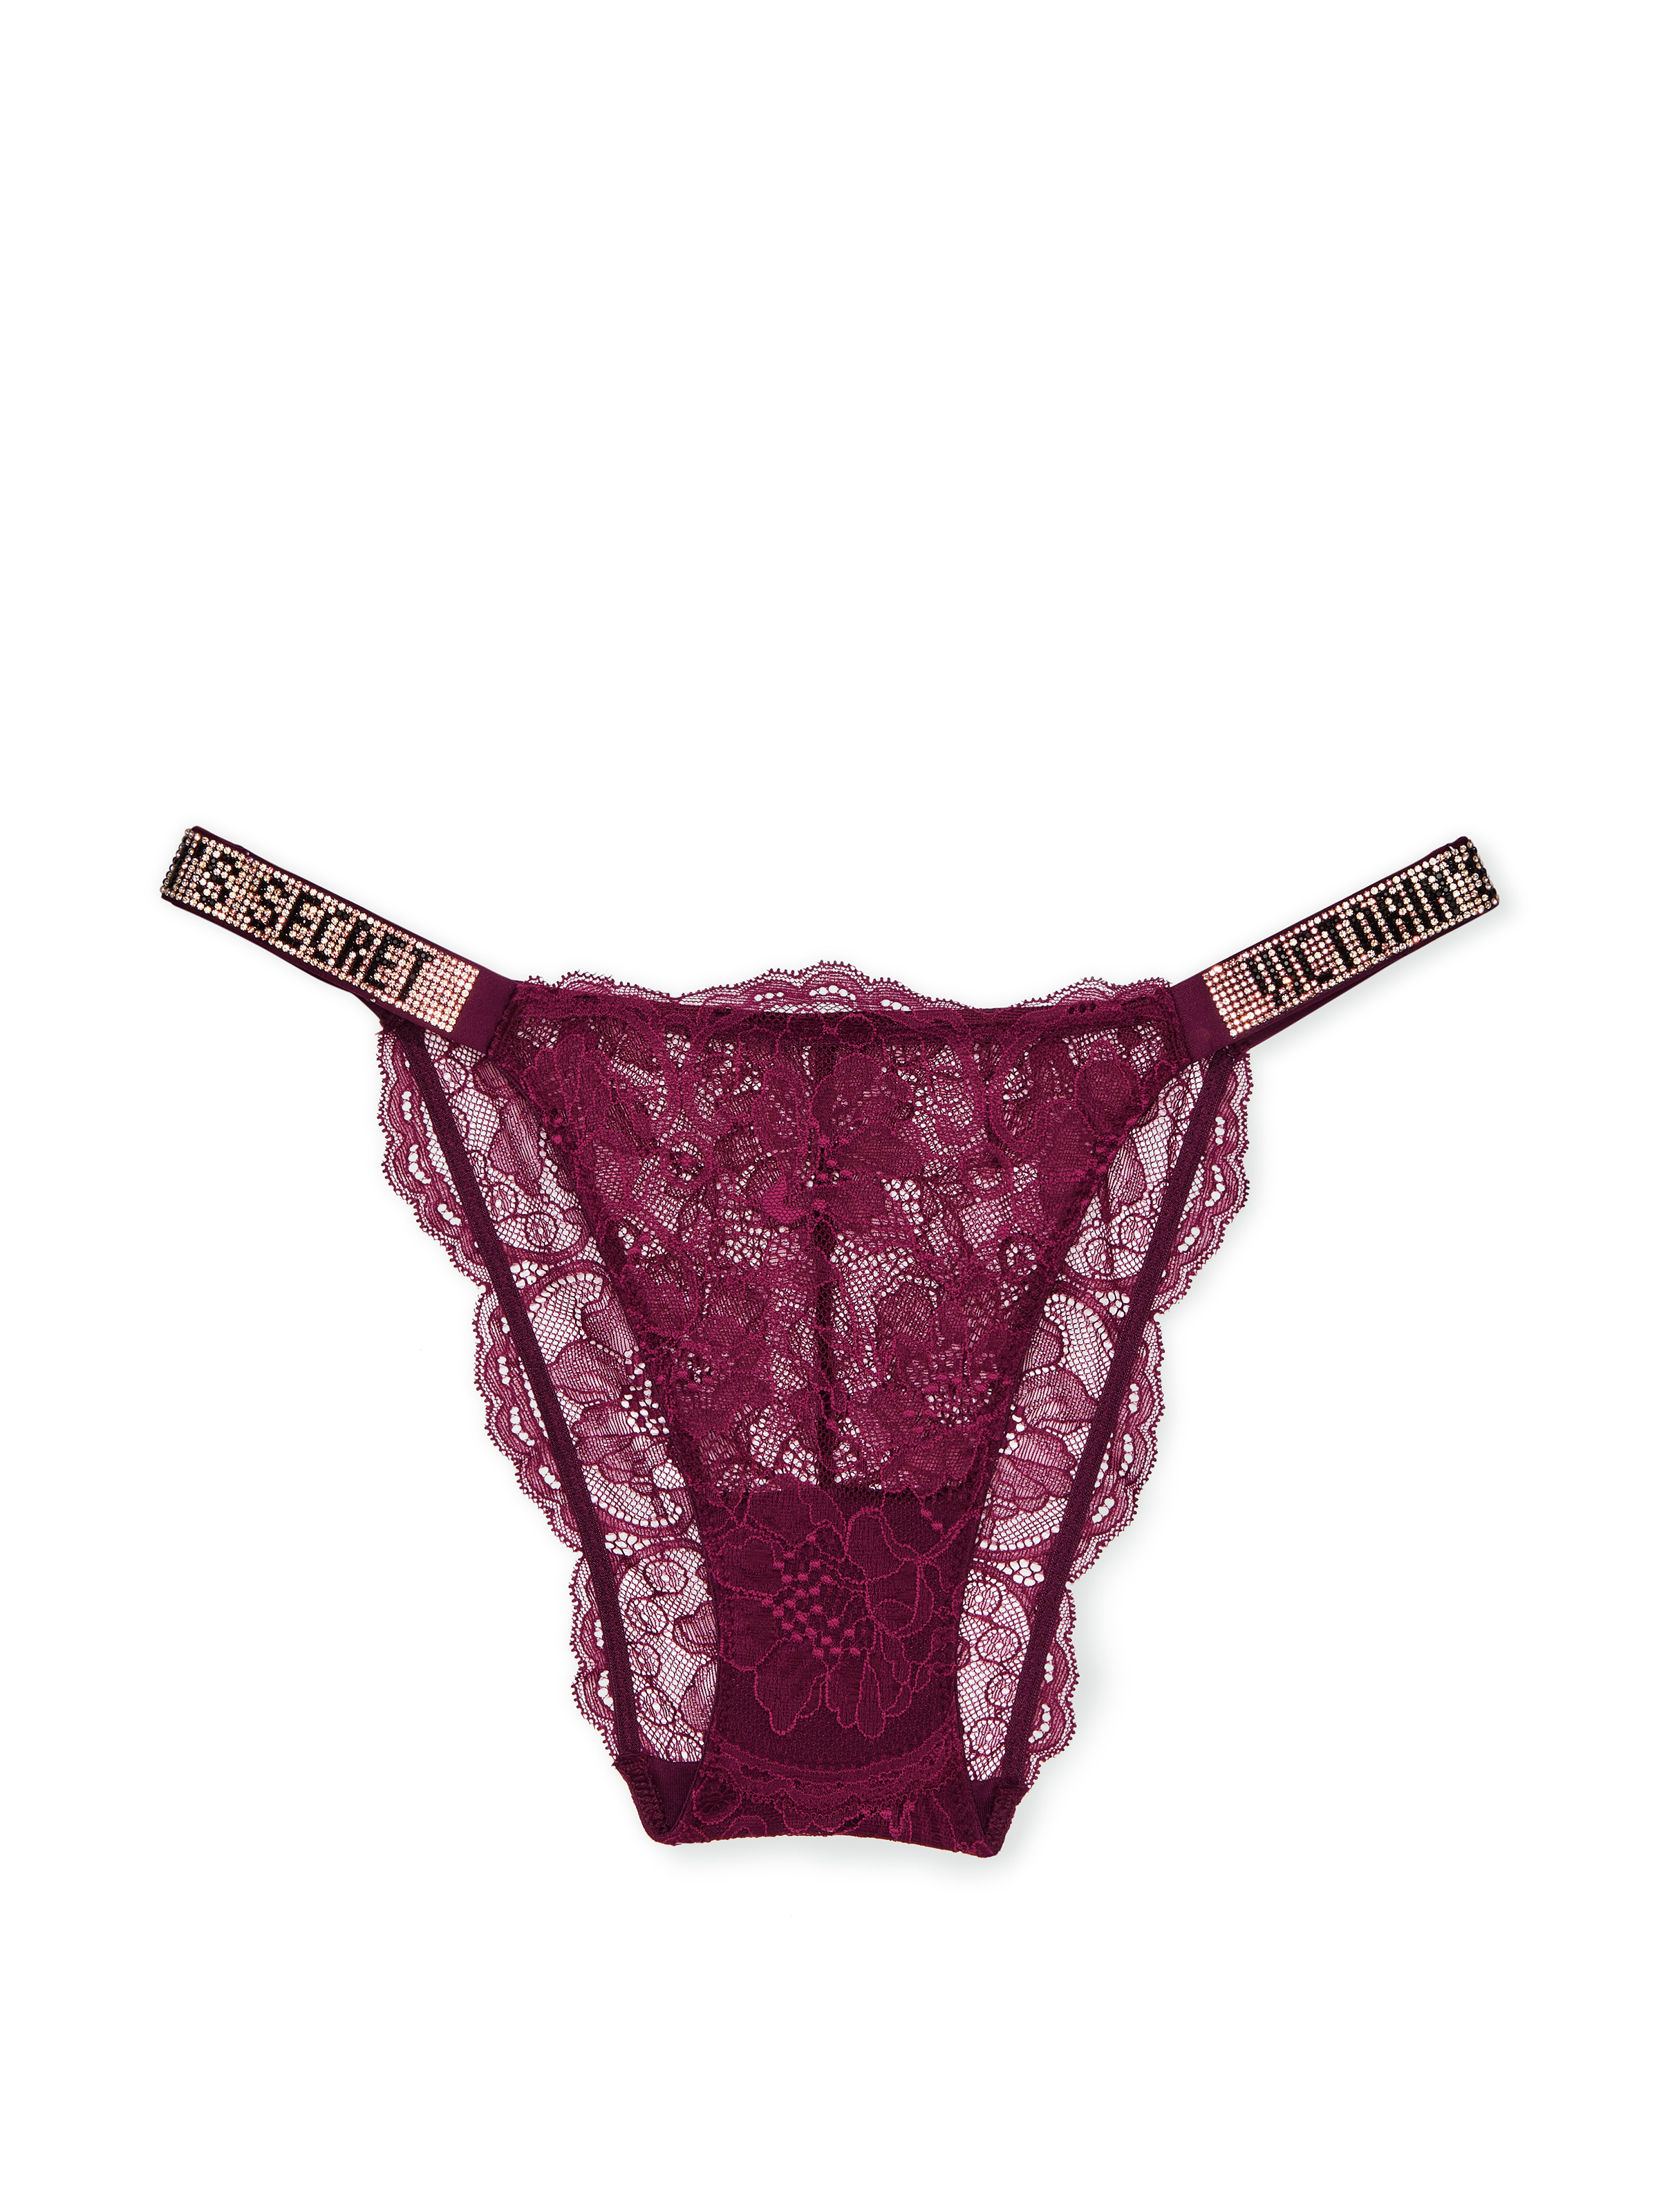 Buy Shine Strap Lace Cheeky Panty Online